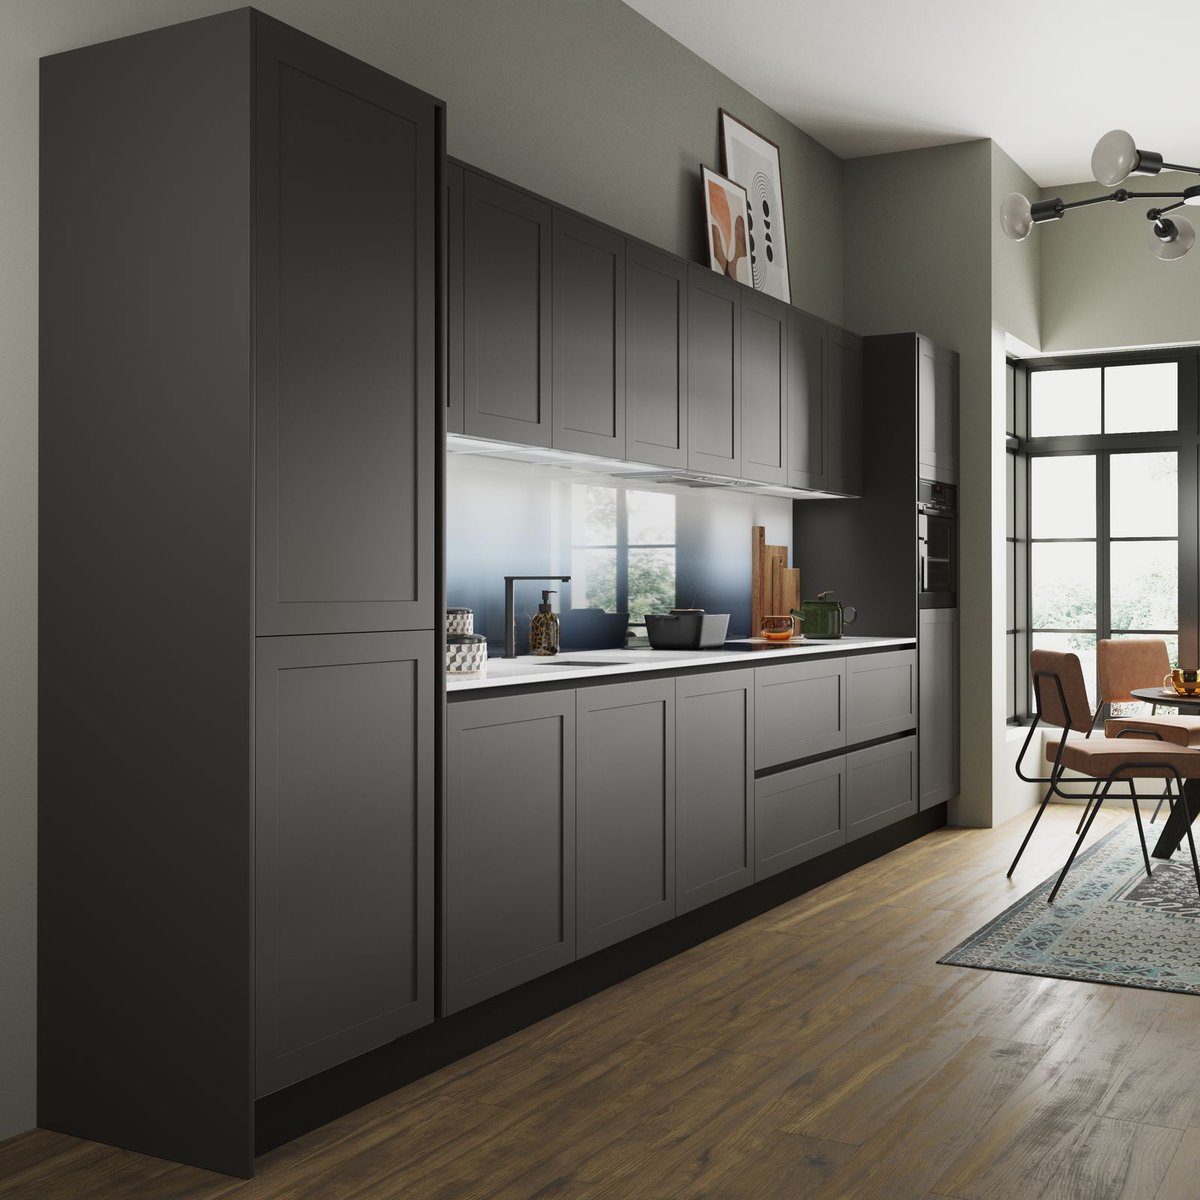 Combining the modern simplicity of a handleless design with the traditional feel of a shaker door, our Linear Finesse range is available in three desirable finishes - Pebble, Hunter Green and Charcoal - pictured. Find your nearest retailer via the link bit.ly/SymphonyRetail…